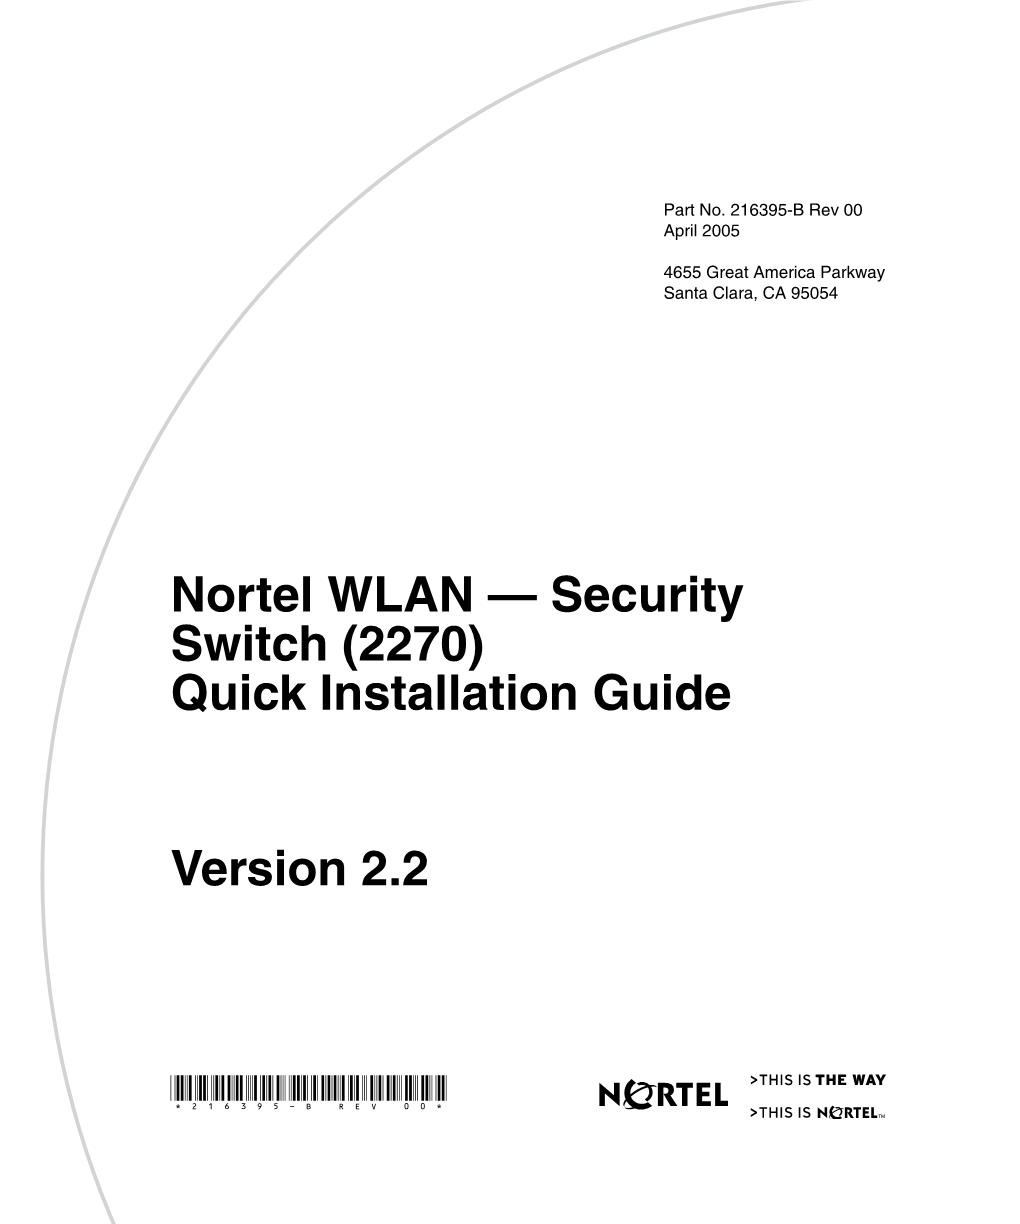 Nortel WLAN Security Switch